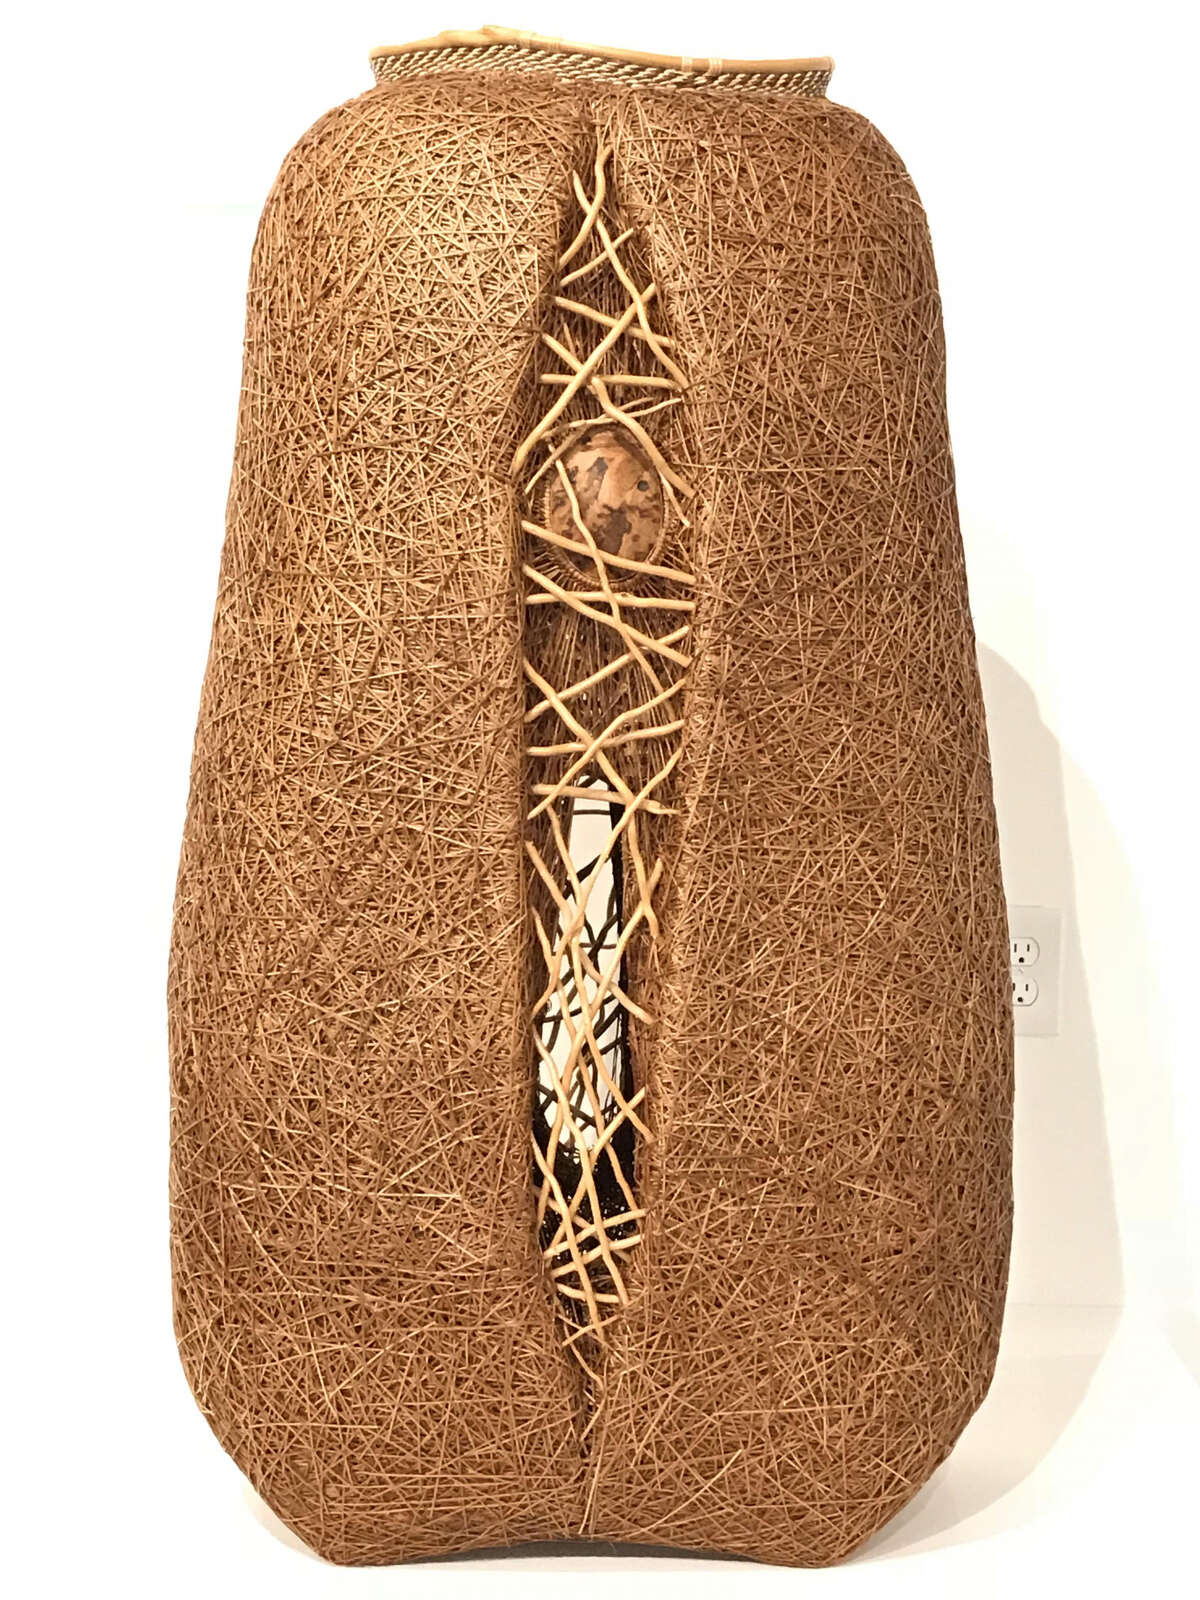 Dawn Nichols Walden’s “Ties That Bind” is among works on view at the Houston Center for Contemporary Craft in a show featuring contemporary basketry from across America.